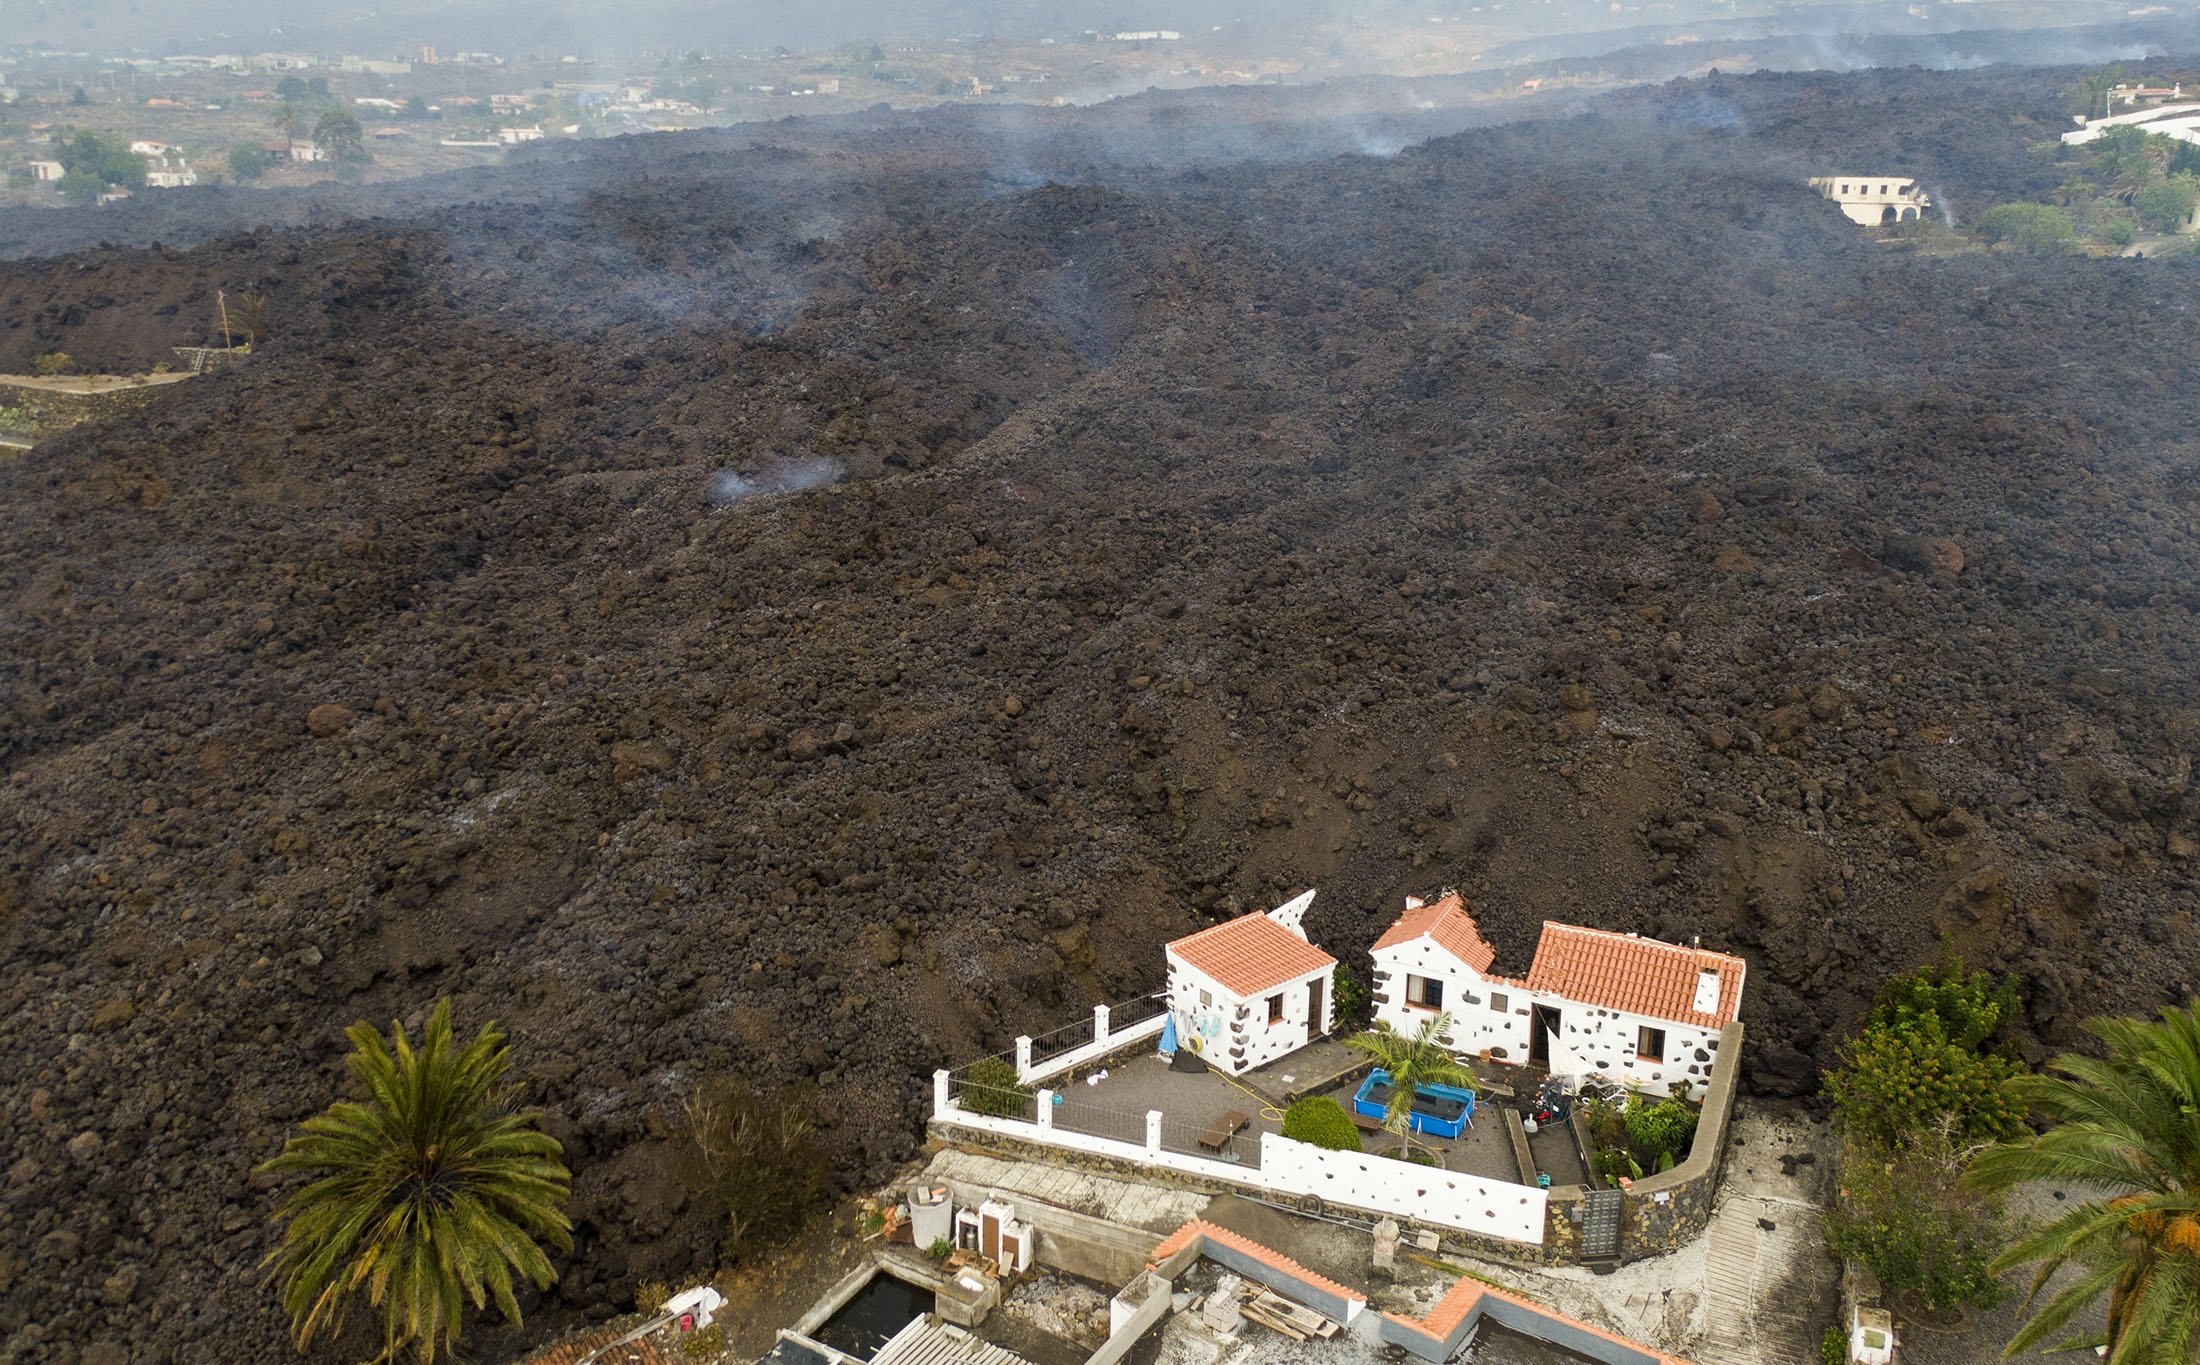 Lava from a volcano eruption flows destroying houses on the island of La Palma in the Canaries, Spain, Sept. 21, 2021. (AP Photo)